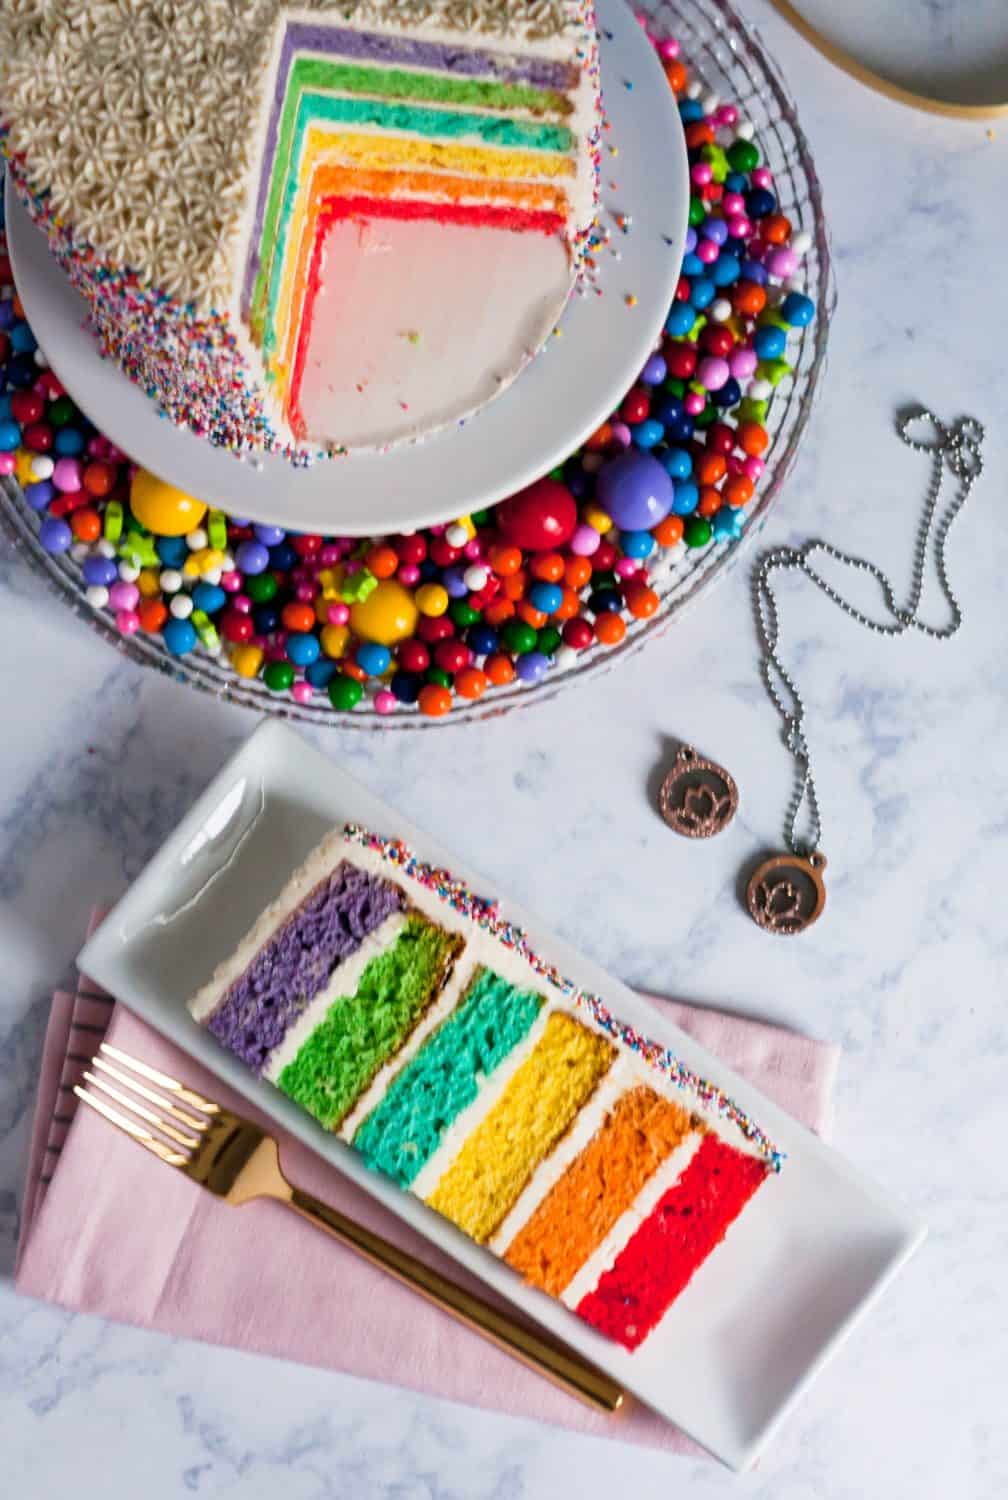 A sprinkle-coated colorful cake makes a beautiful centerpiece dessert for a party. Learn how to decorate a rainbow cake like a pro with my easy-to-follow tutorial. * GoodieGodmother.com